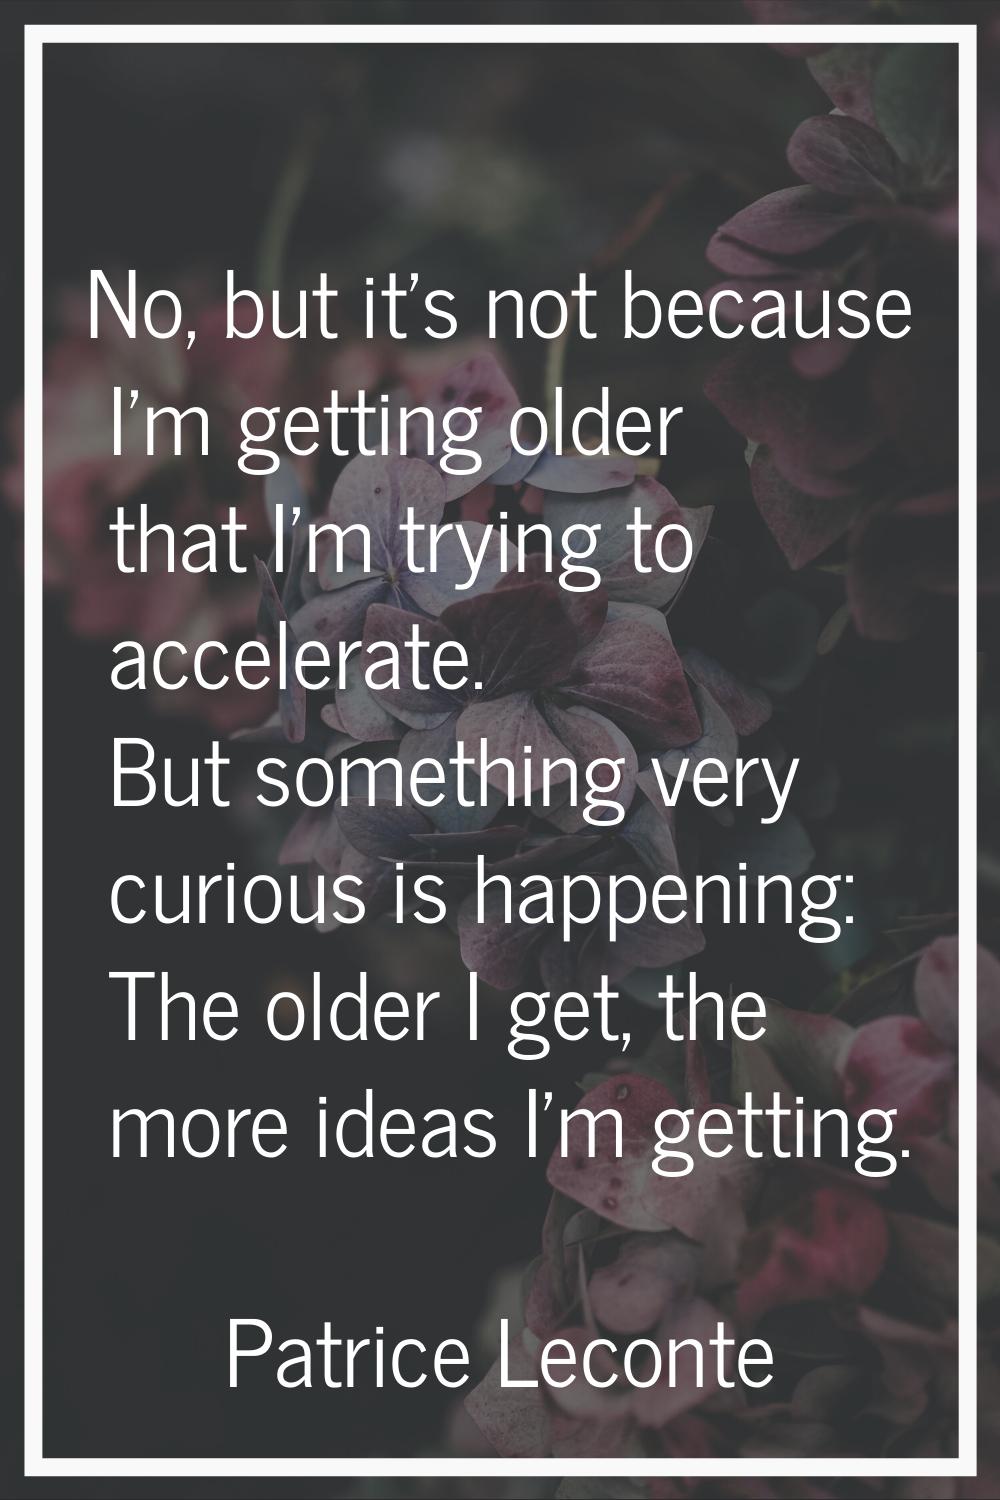 No, but it's not because I'm getting older that I'm trying to accelerate. But something very curiou